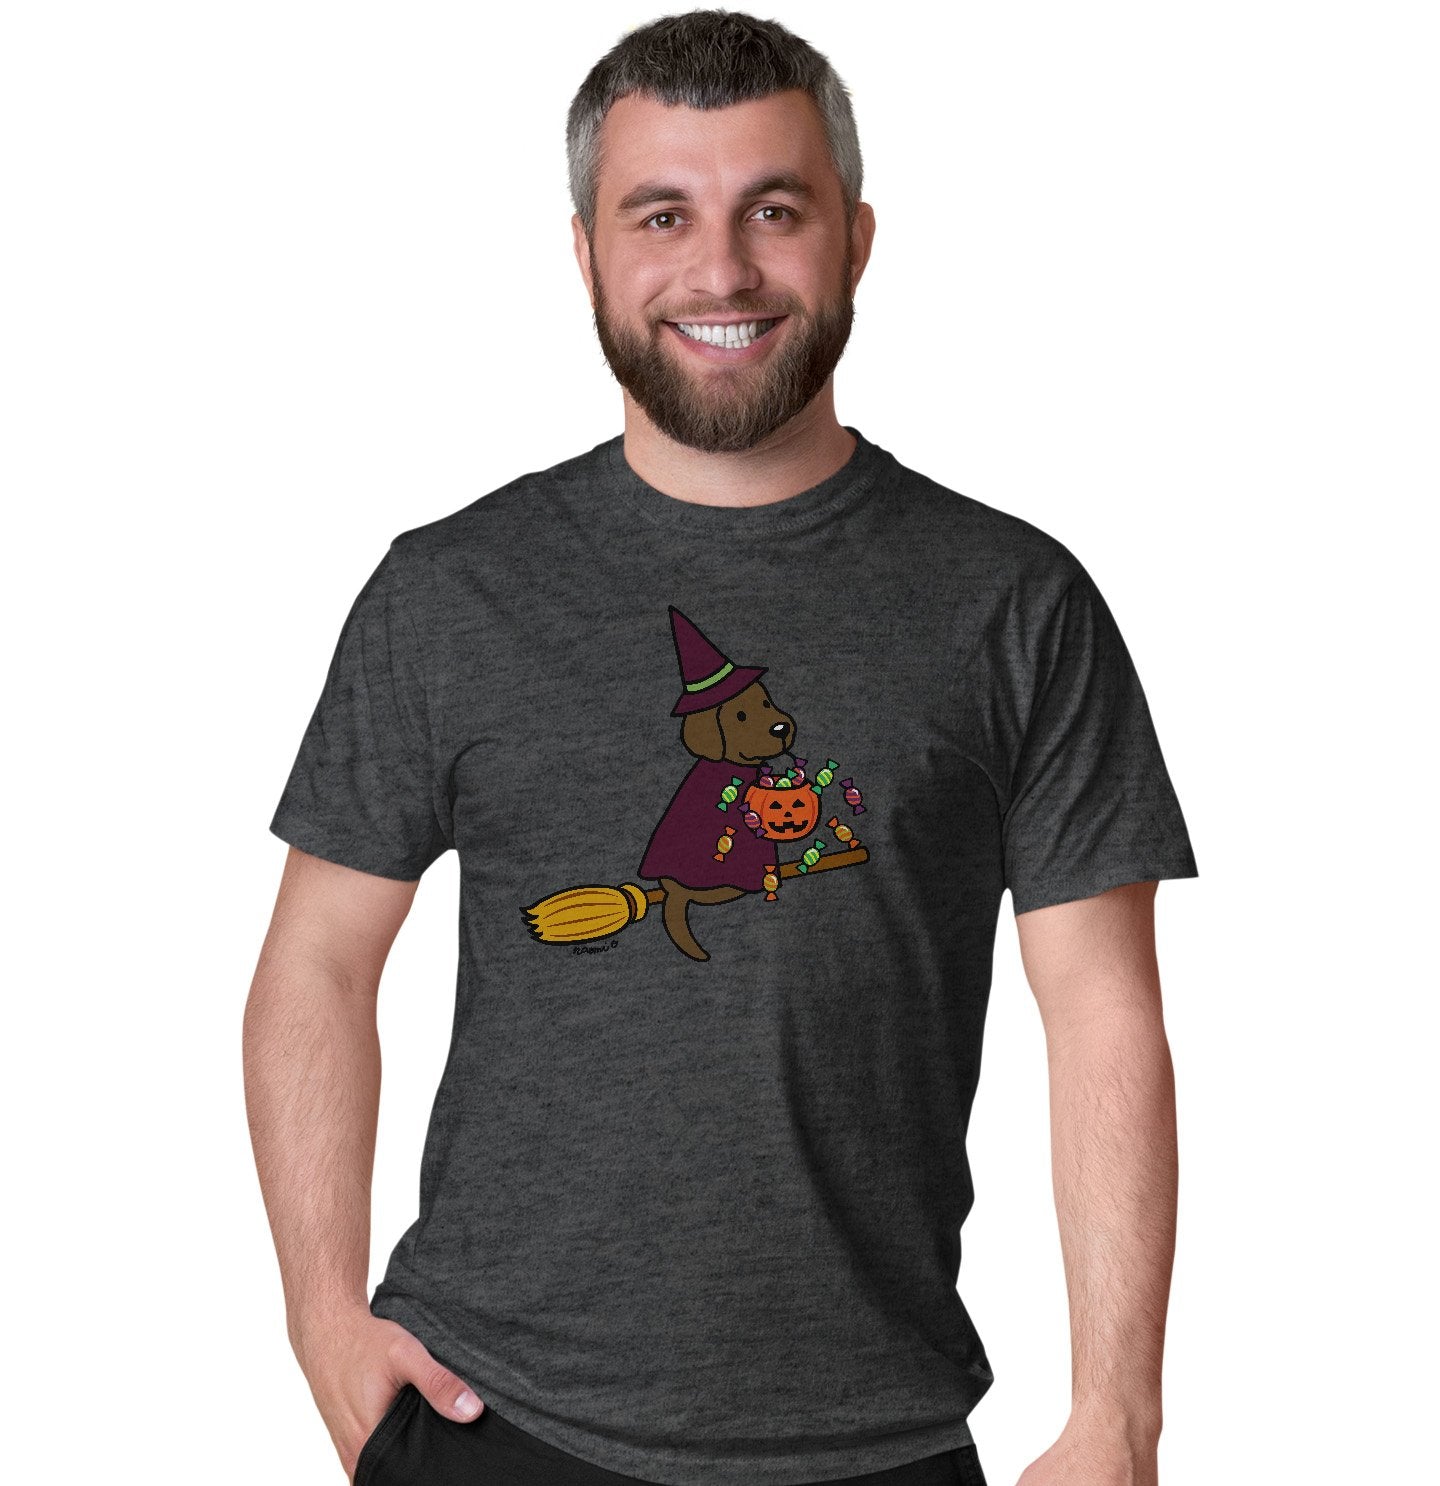 Chocolate Lab Witch - Halloween - Adult Unisex T-Shirt